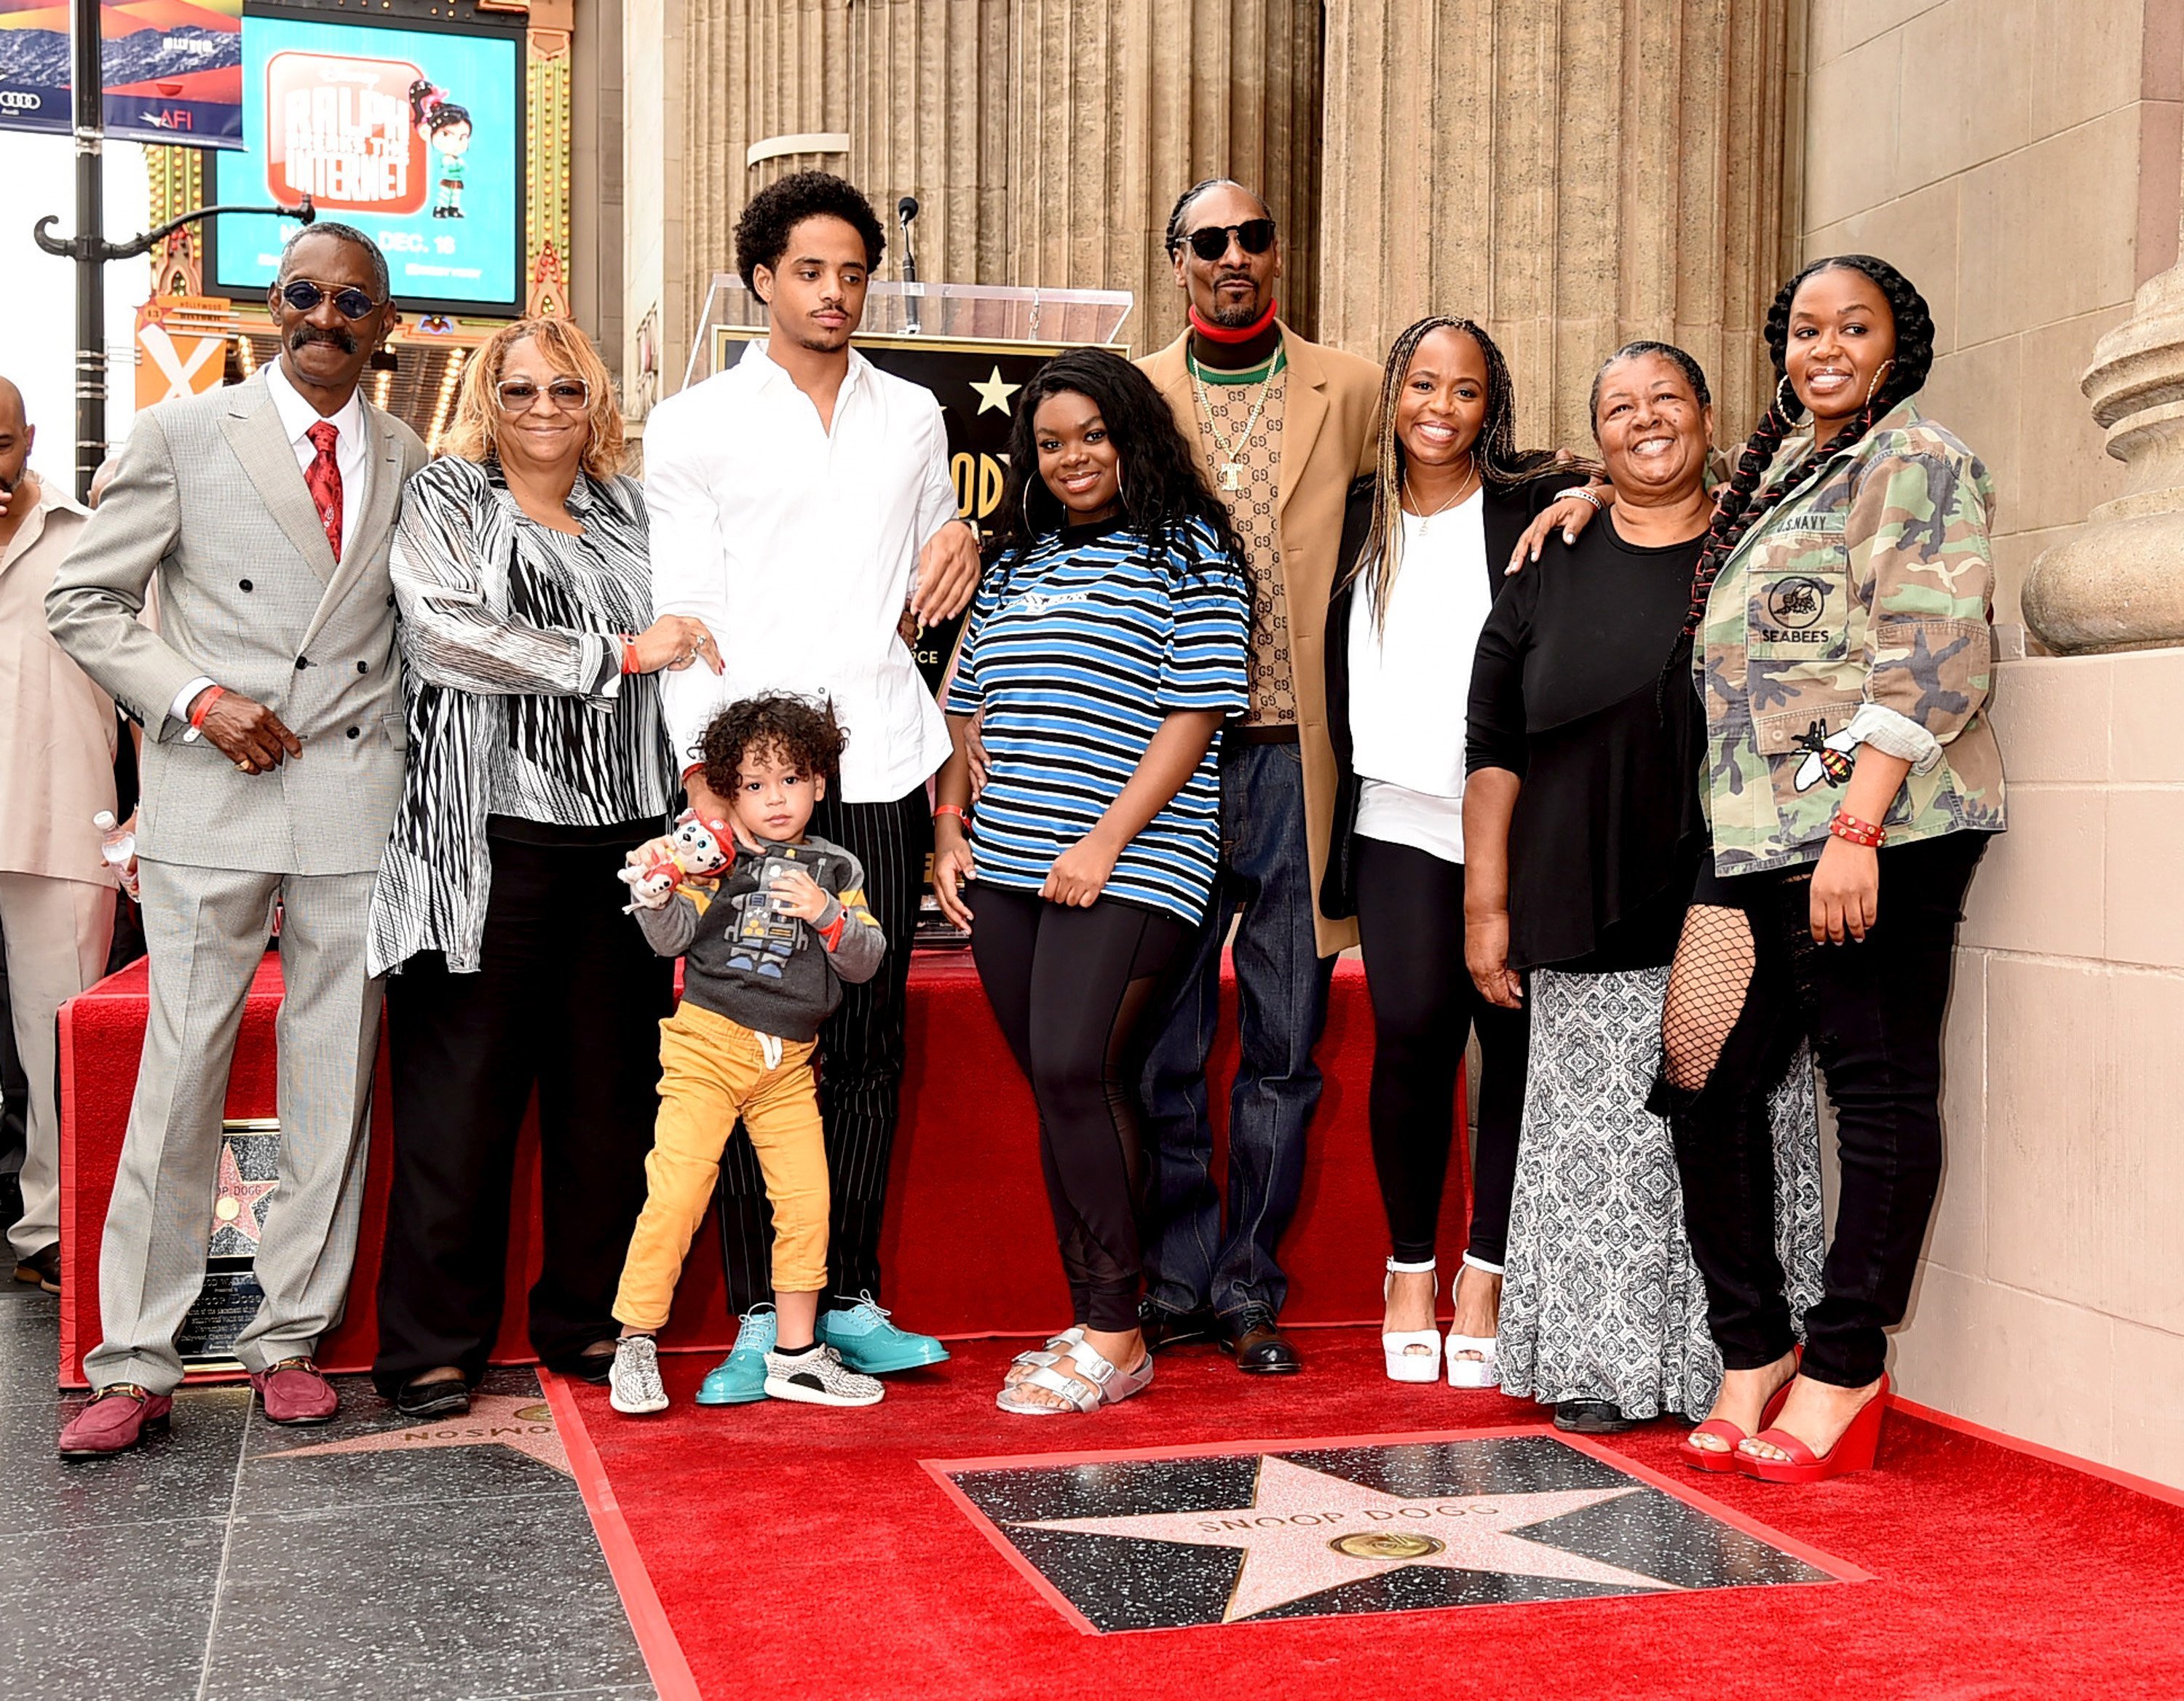 Snoop Dogg is surrounded by his family as he gets his star on The Hollywood Walk Of Fame in LA on Nov. 19, 2018. | Photo: Getty Images.